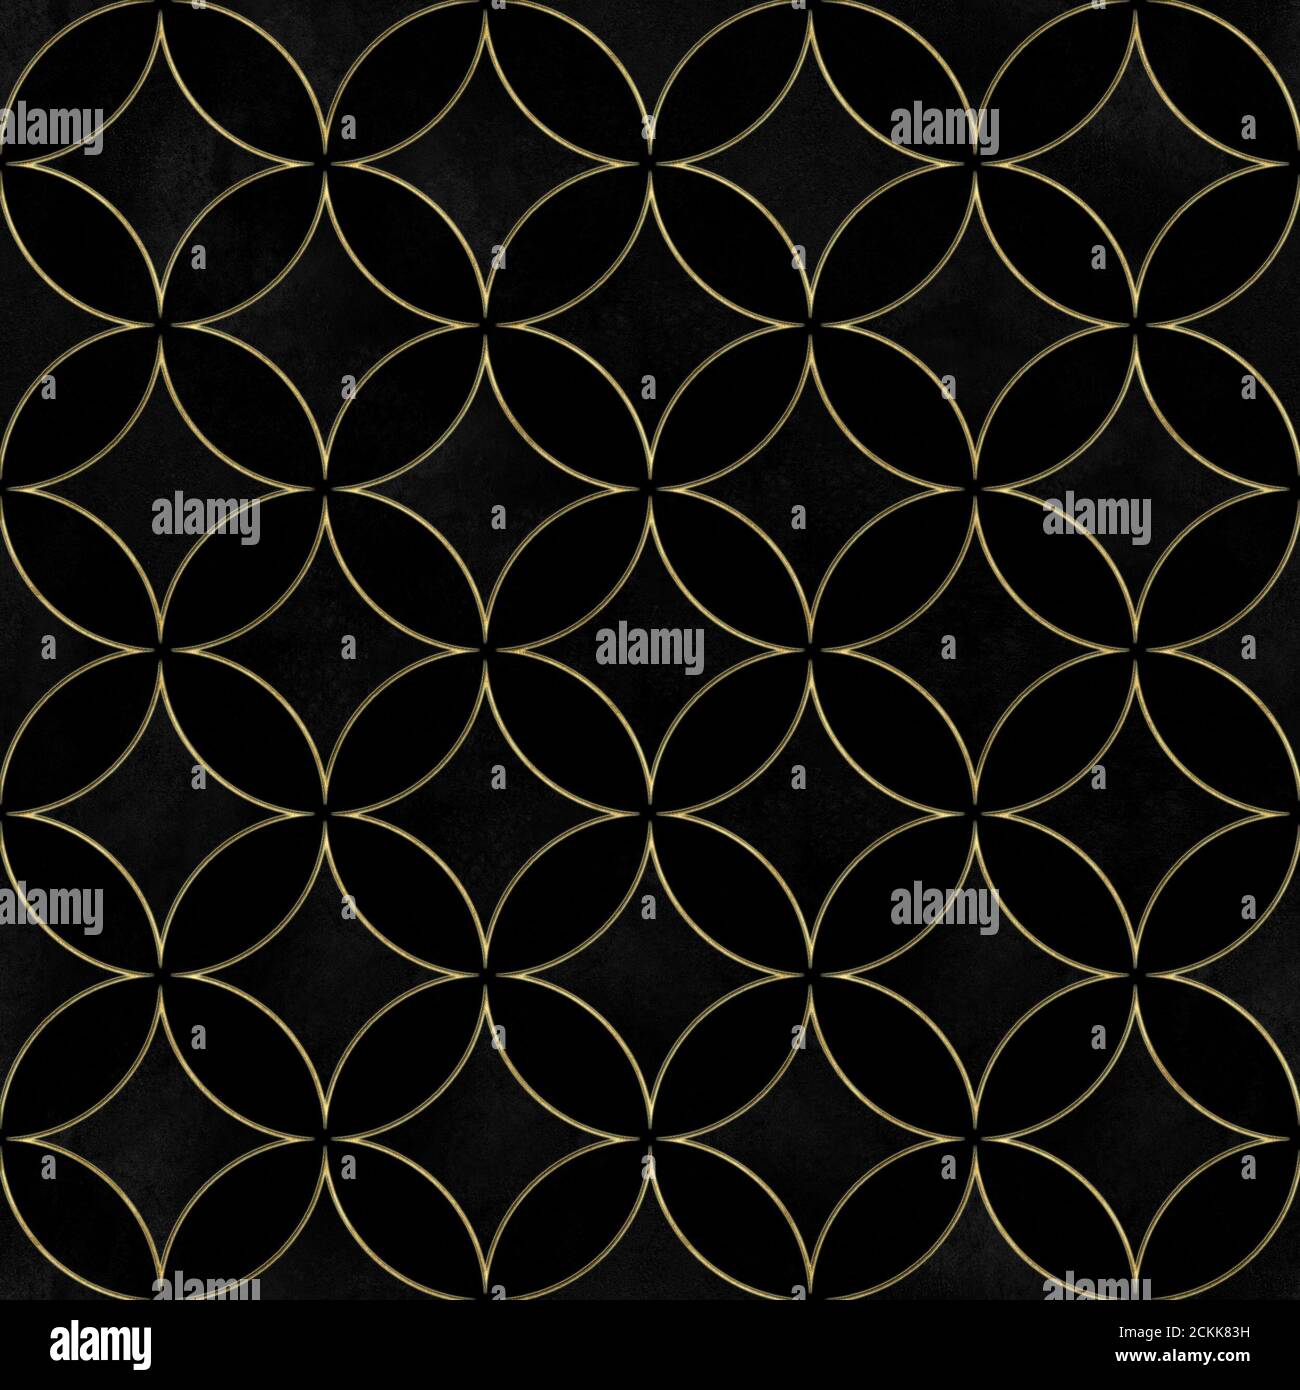 Black velvet luxury overlapping circles seamless pattern. Watercolor hand drawn black and gold texture background. Watercolour geometrical sphere shap Stock Photo